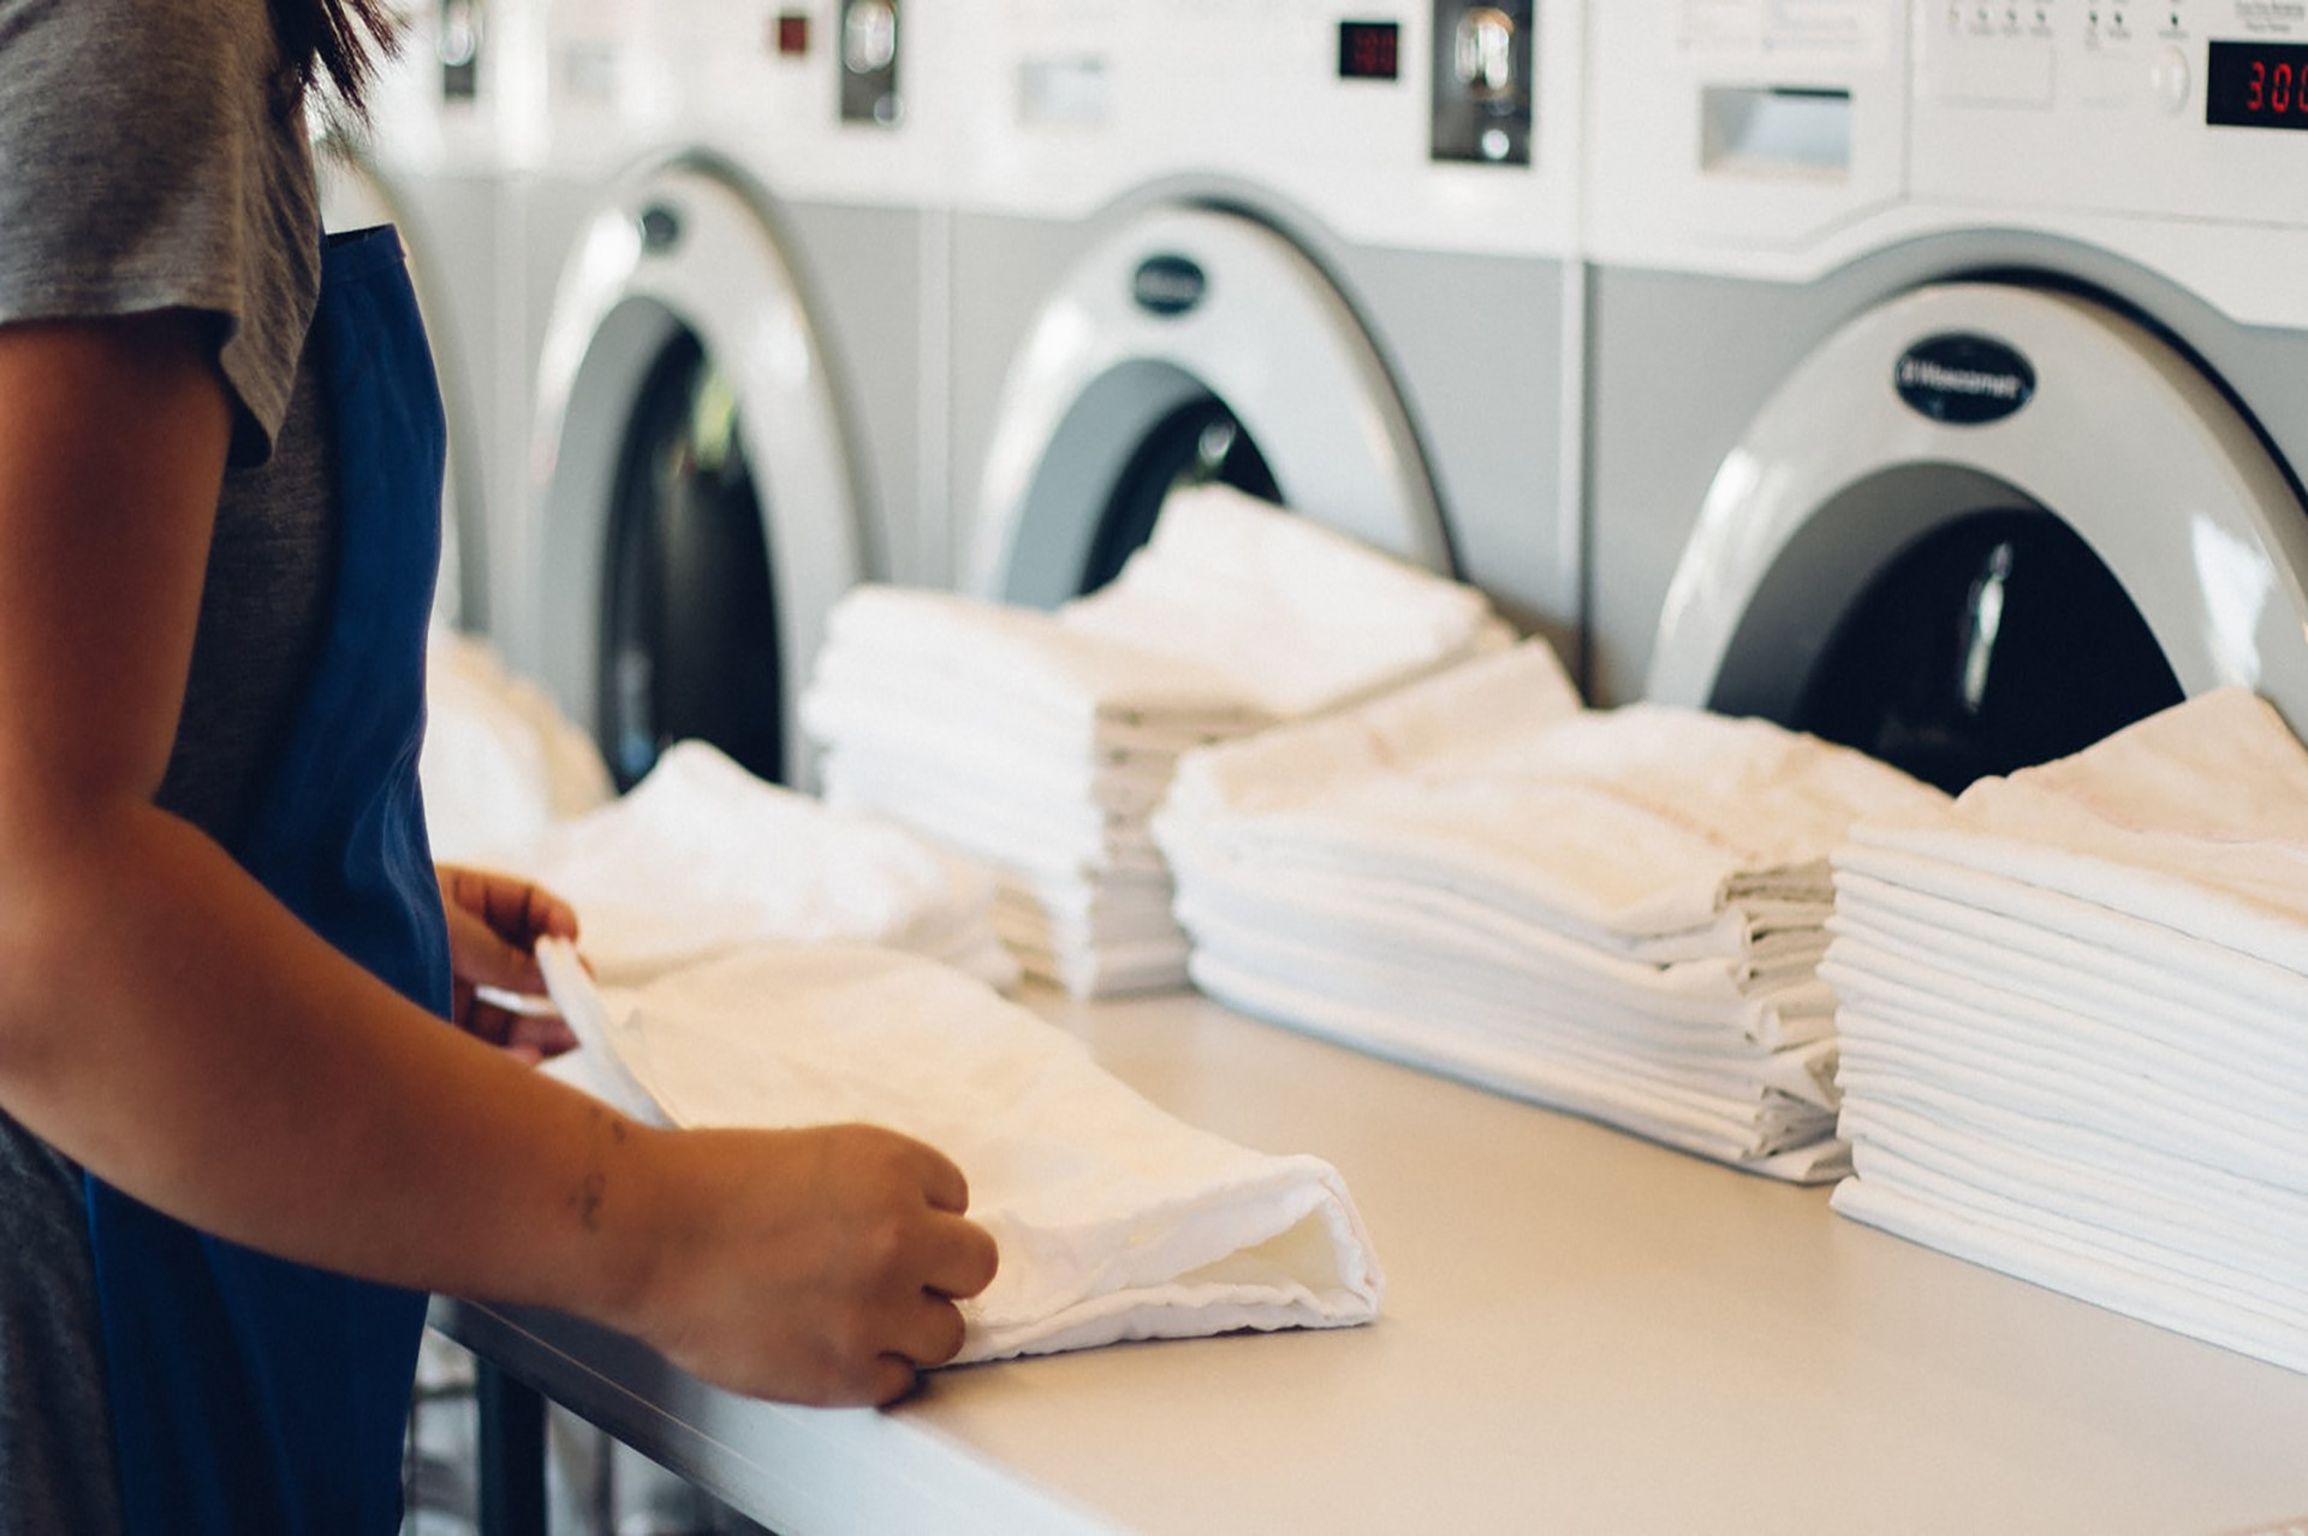 How to Find The Best Dry Cleaners Near Me?